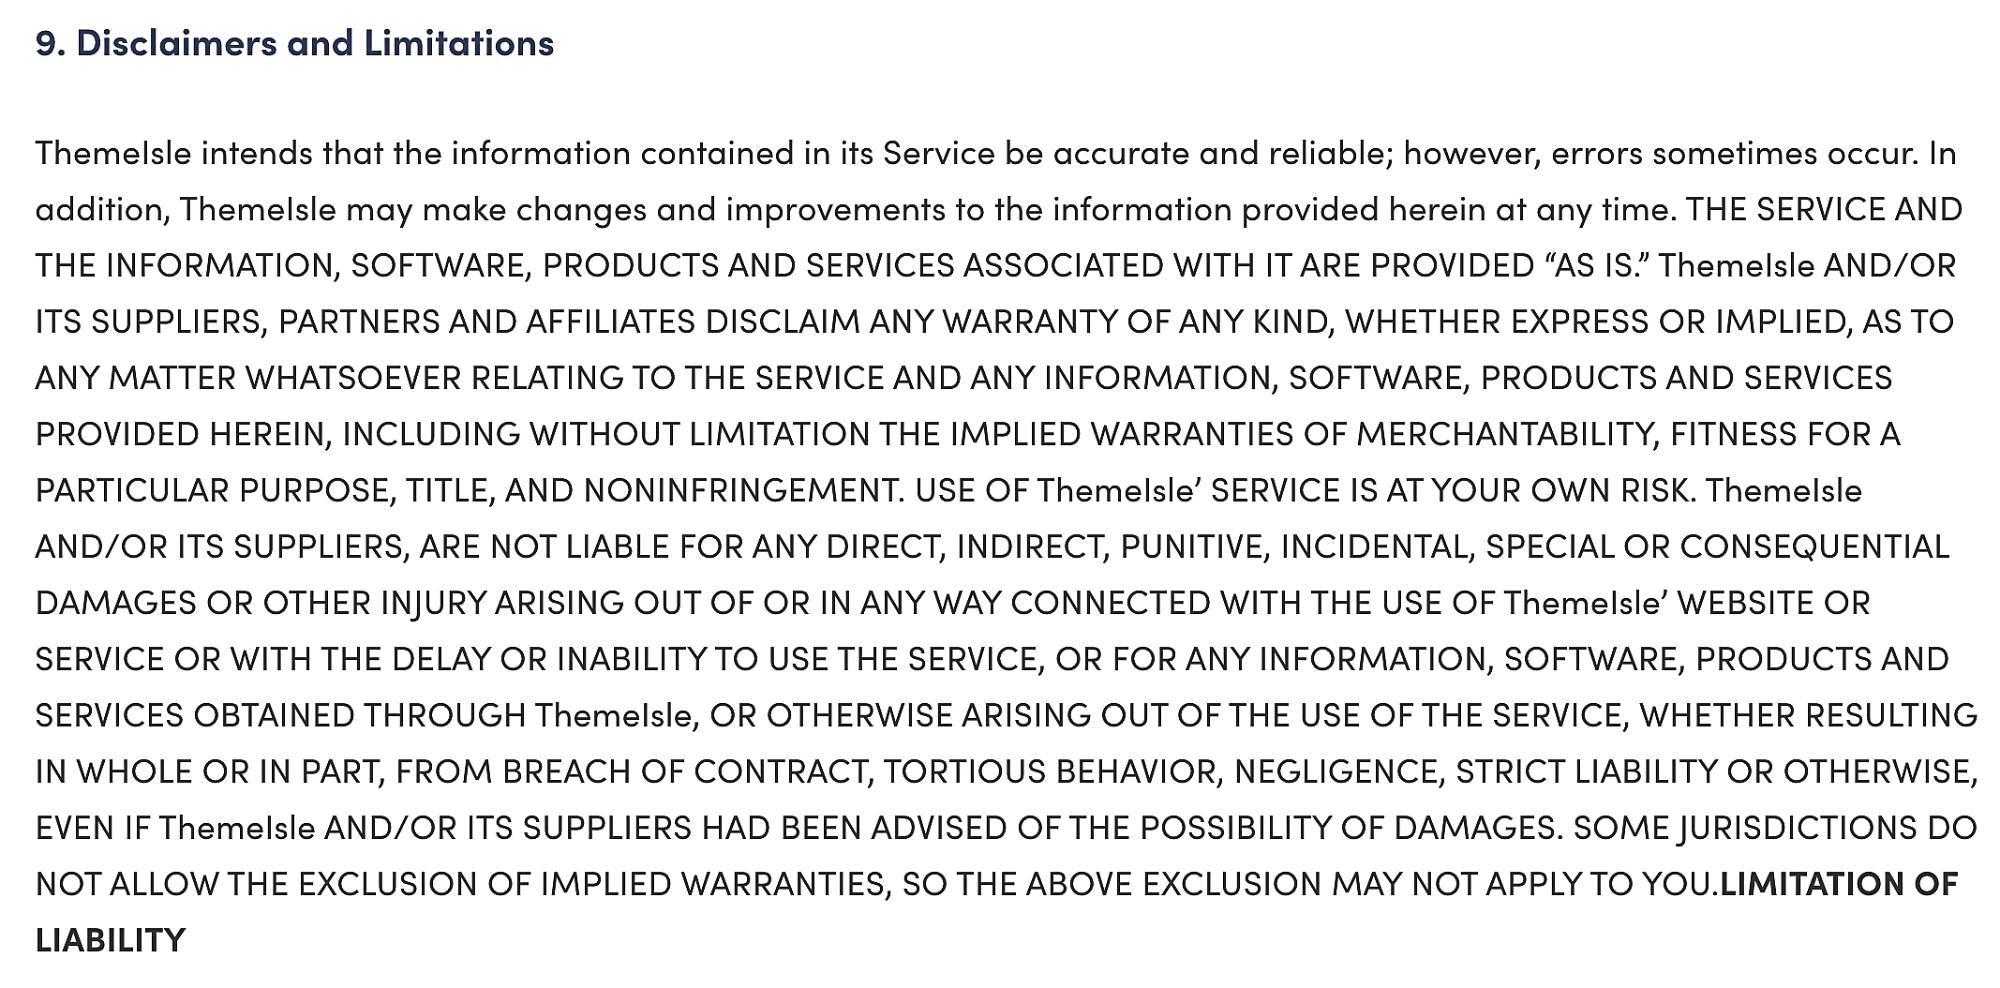 A portion of the Themeisle disclaimer clause